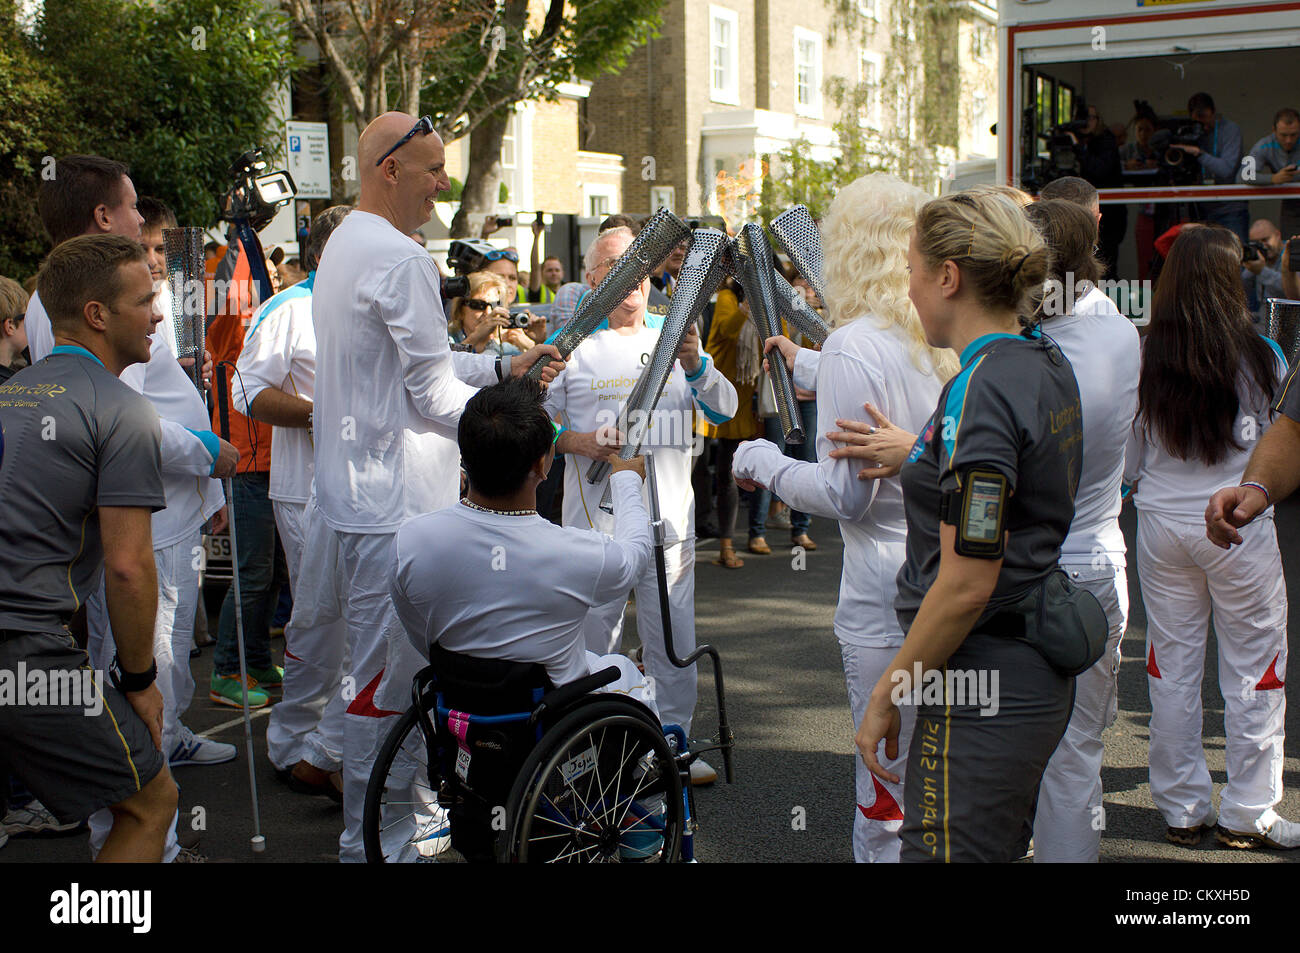 London UK. 29th Aug 2012. The Paralympic flame is passed between torchbearers in Carlton Hill, St. John's Wood on the last day of its journey to the Olympic Stadium, Wednesday 29 August 2012. Credit:  Richard Slater / Alamy Live News Stock Photo